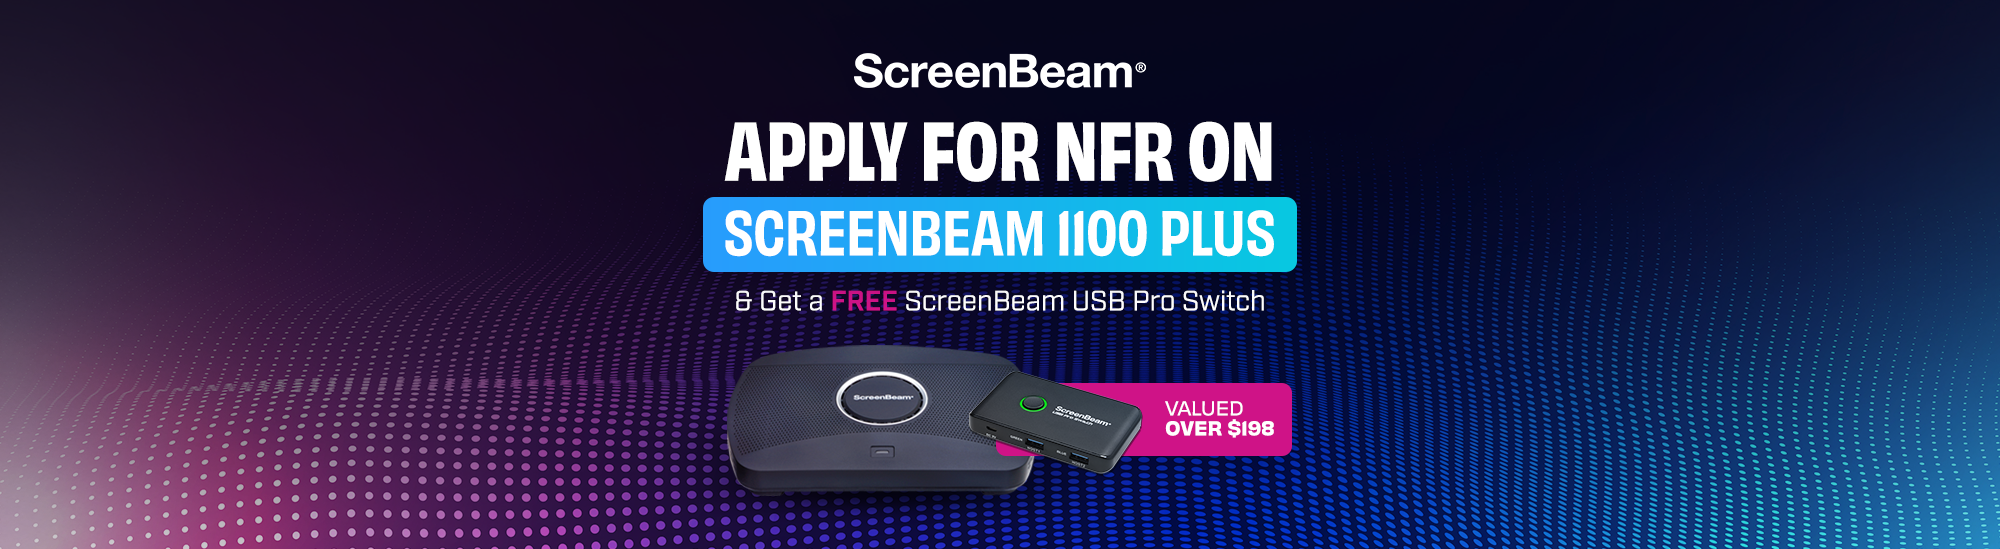 ScreenBeam Apply for NFR on SB-1100P